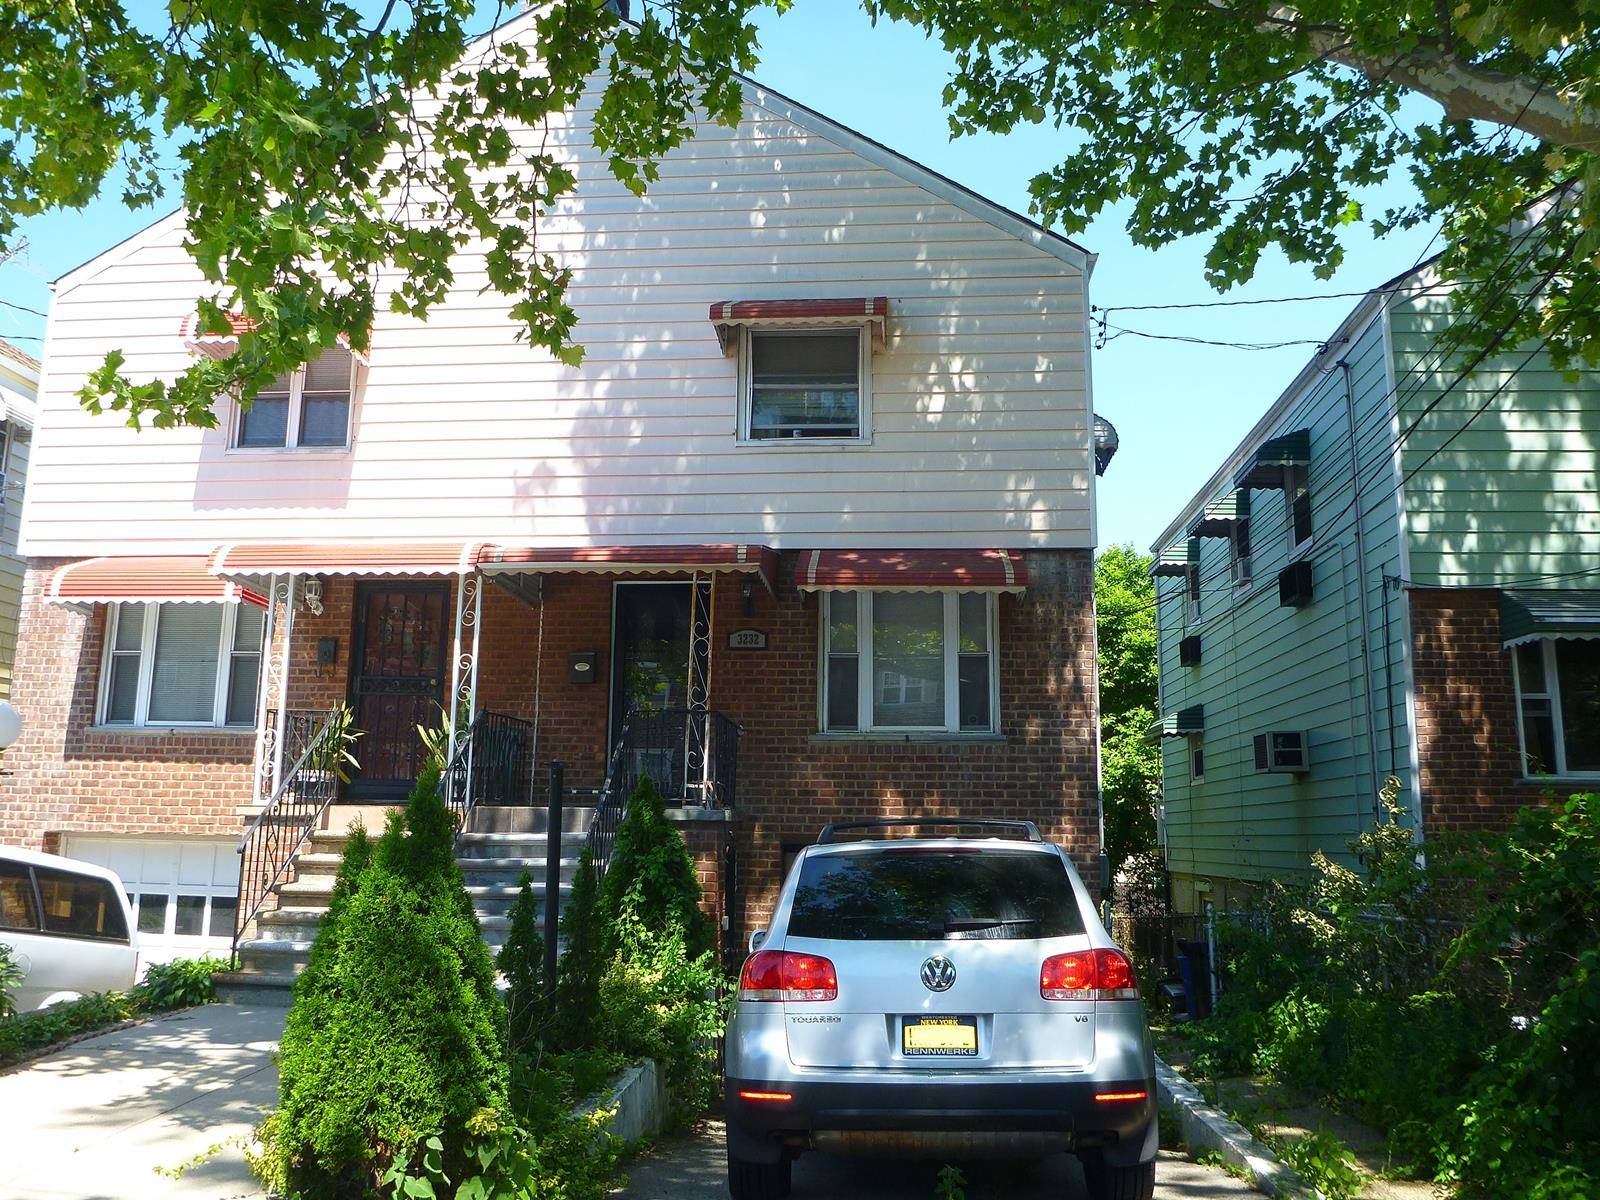 ATTRACTIVE ONE FAMILY WITH MOTHER IN LAW BASEMENT STUDIO APARTMENT Main floor contains renovated kitchen with granite counters, hardwood cabinetry, stainless steel appliances and glass tile backsplash ; half bath, ...